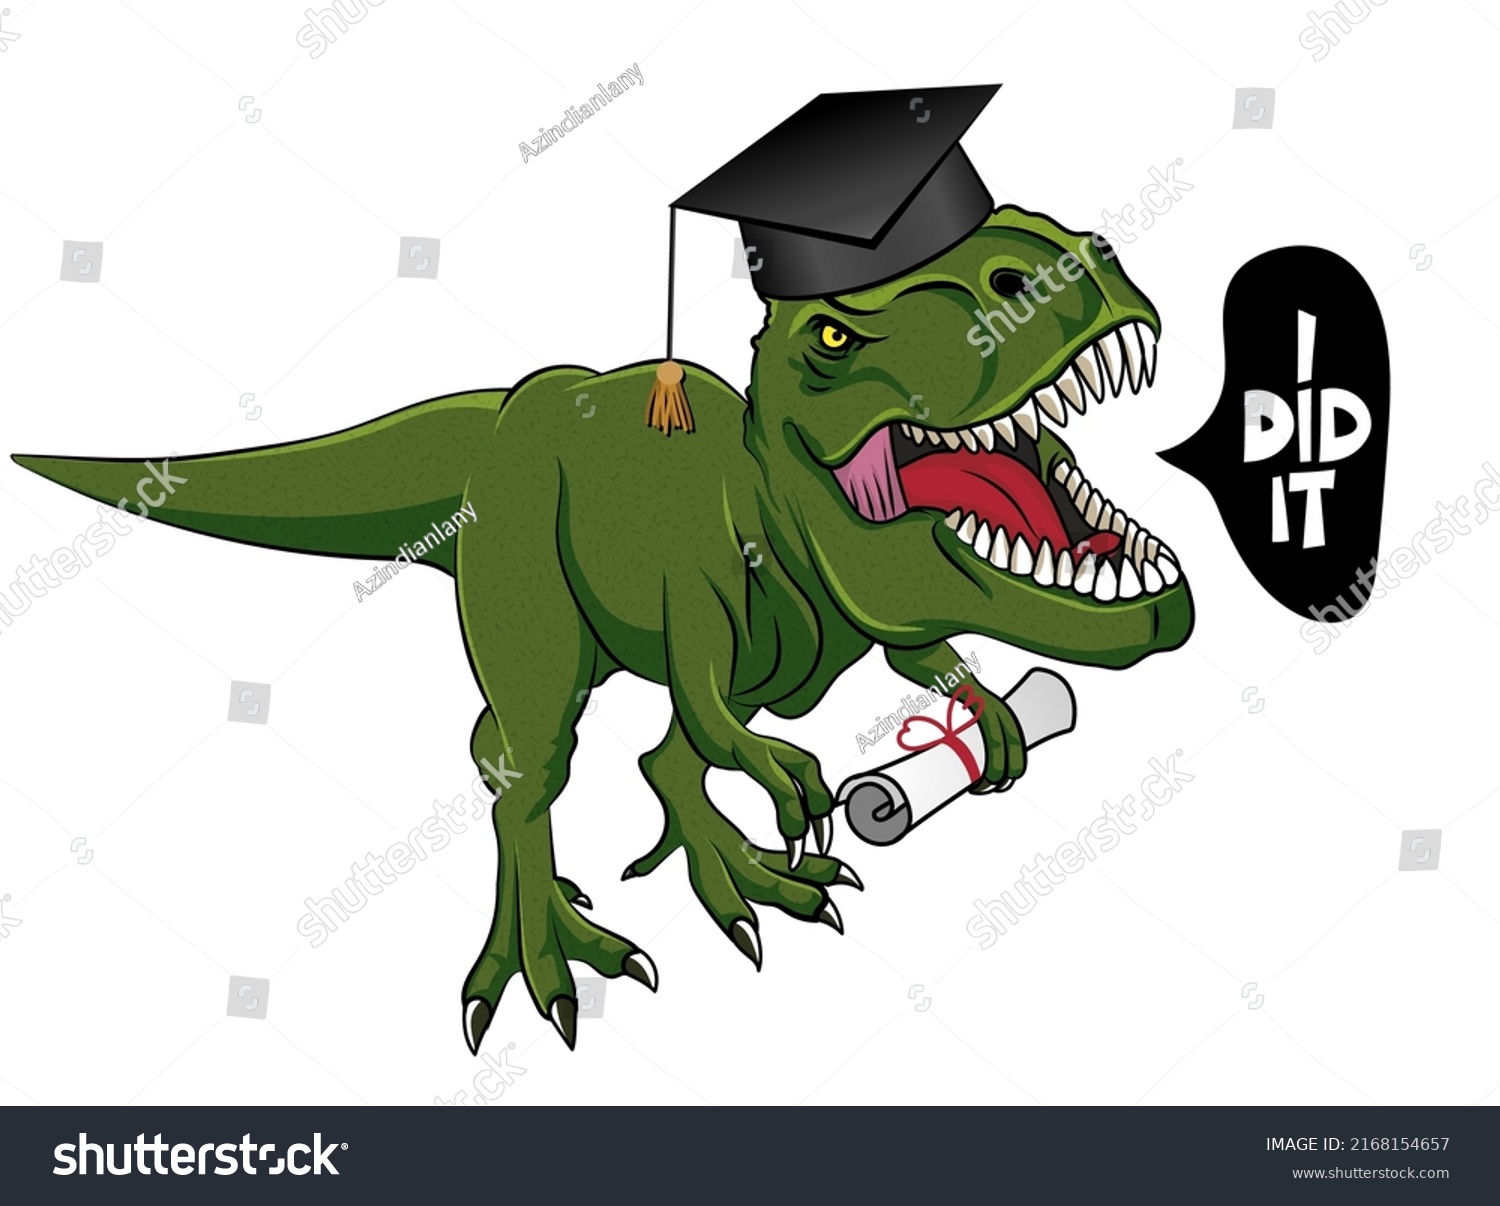 SVG of I did it! - T rex tyrannosaurus in graduate cap. Cute smiling happy dinosaur with diploma. Dino character in cartoon style. Congratulation graduates. Good for t-shirt, mug, gift.  svg